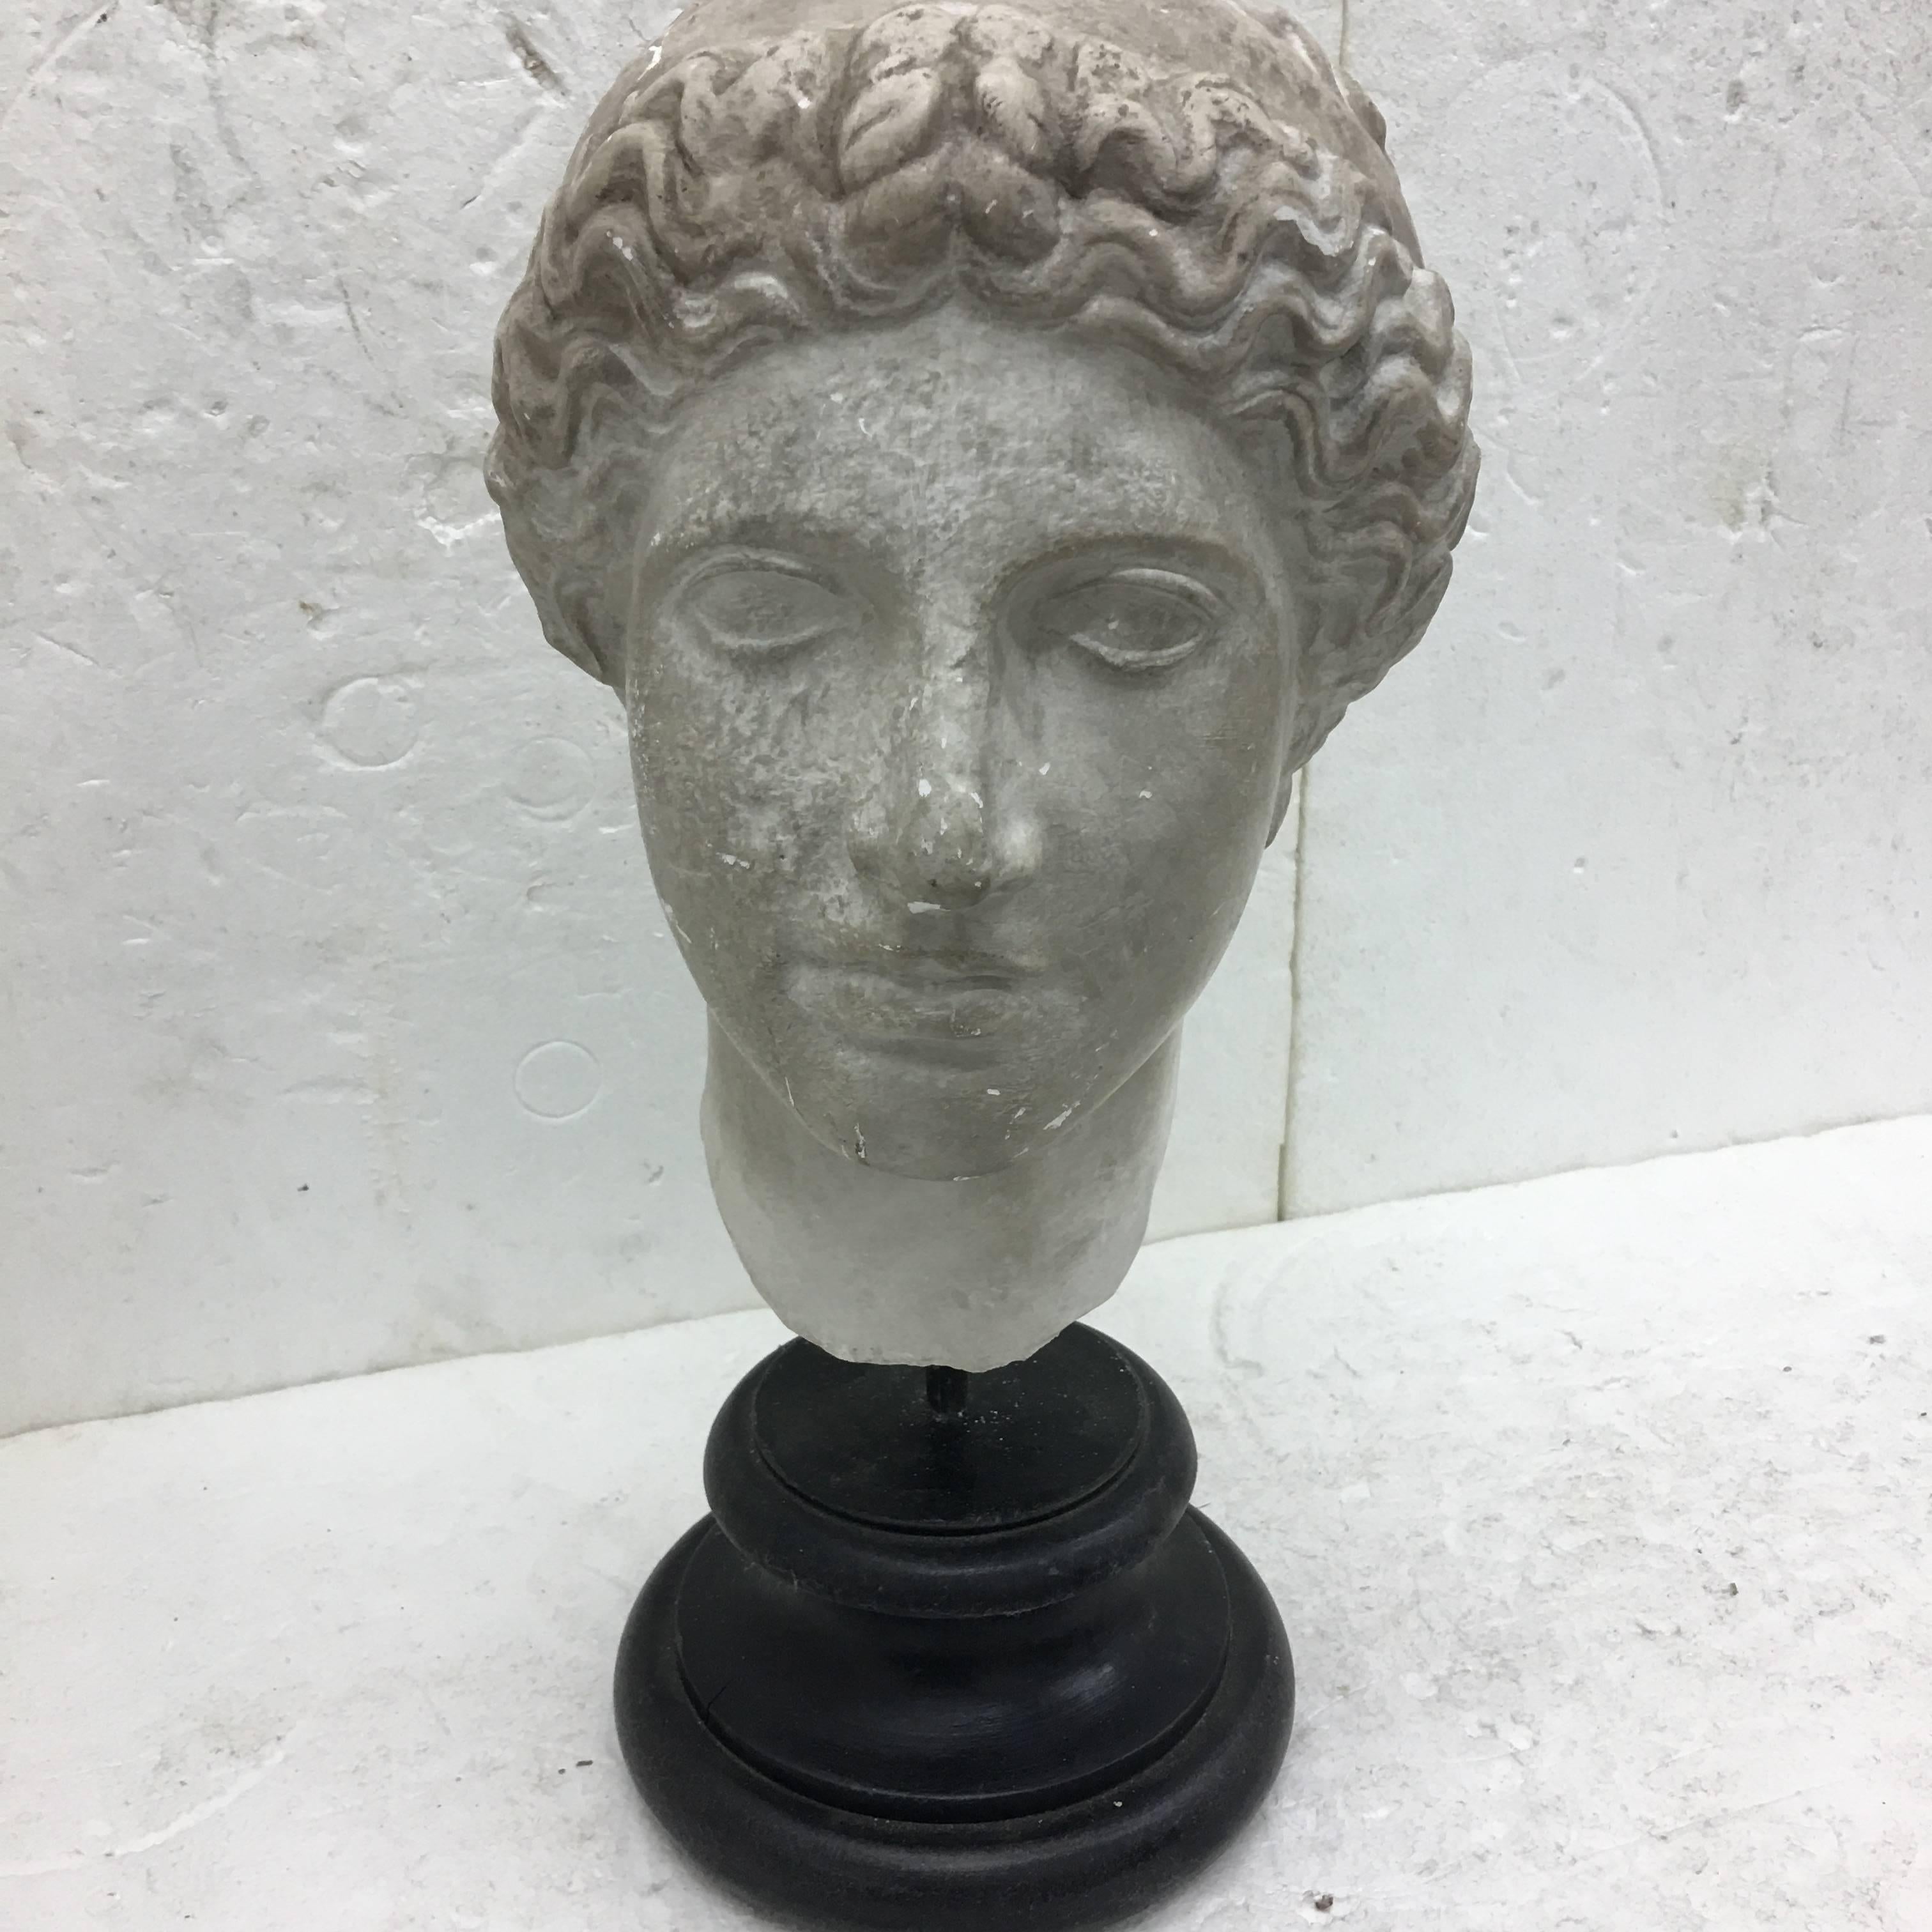 Particular school study plaster head on a black wood base, made in Italy in circa 1930.